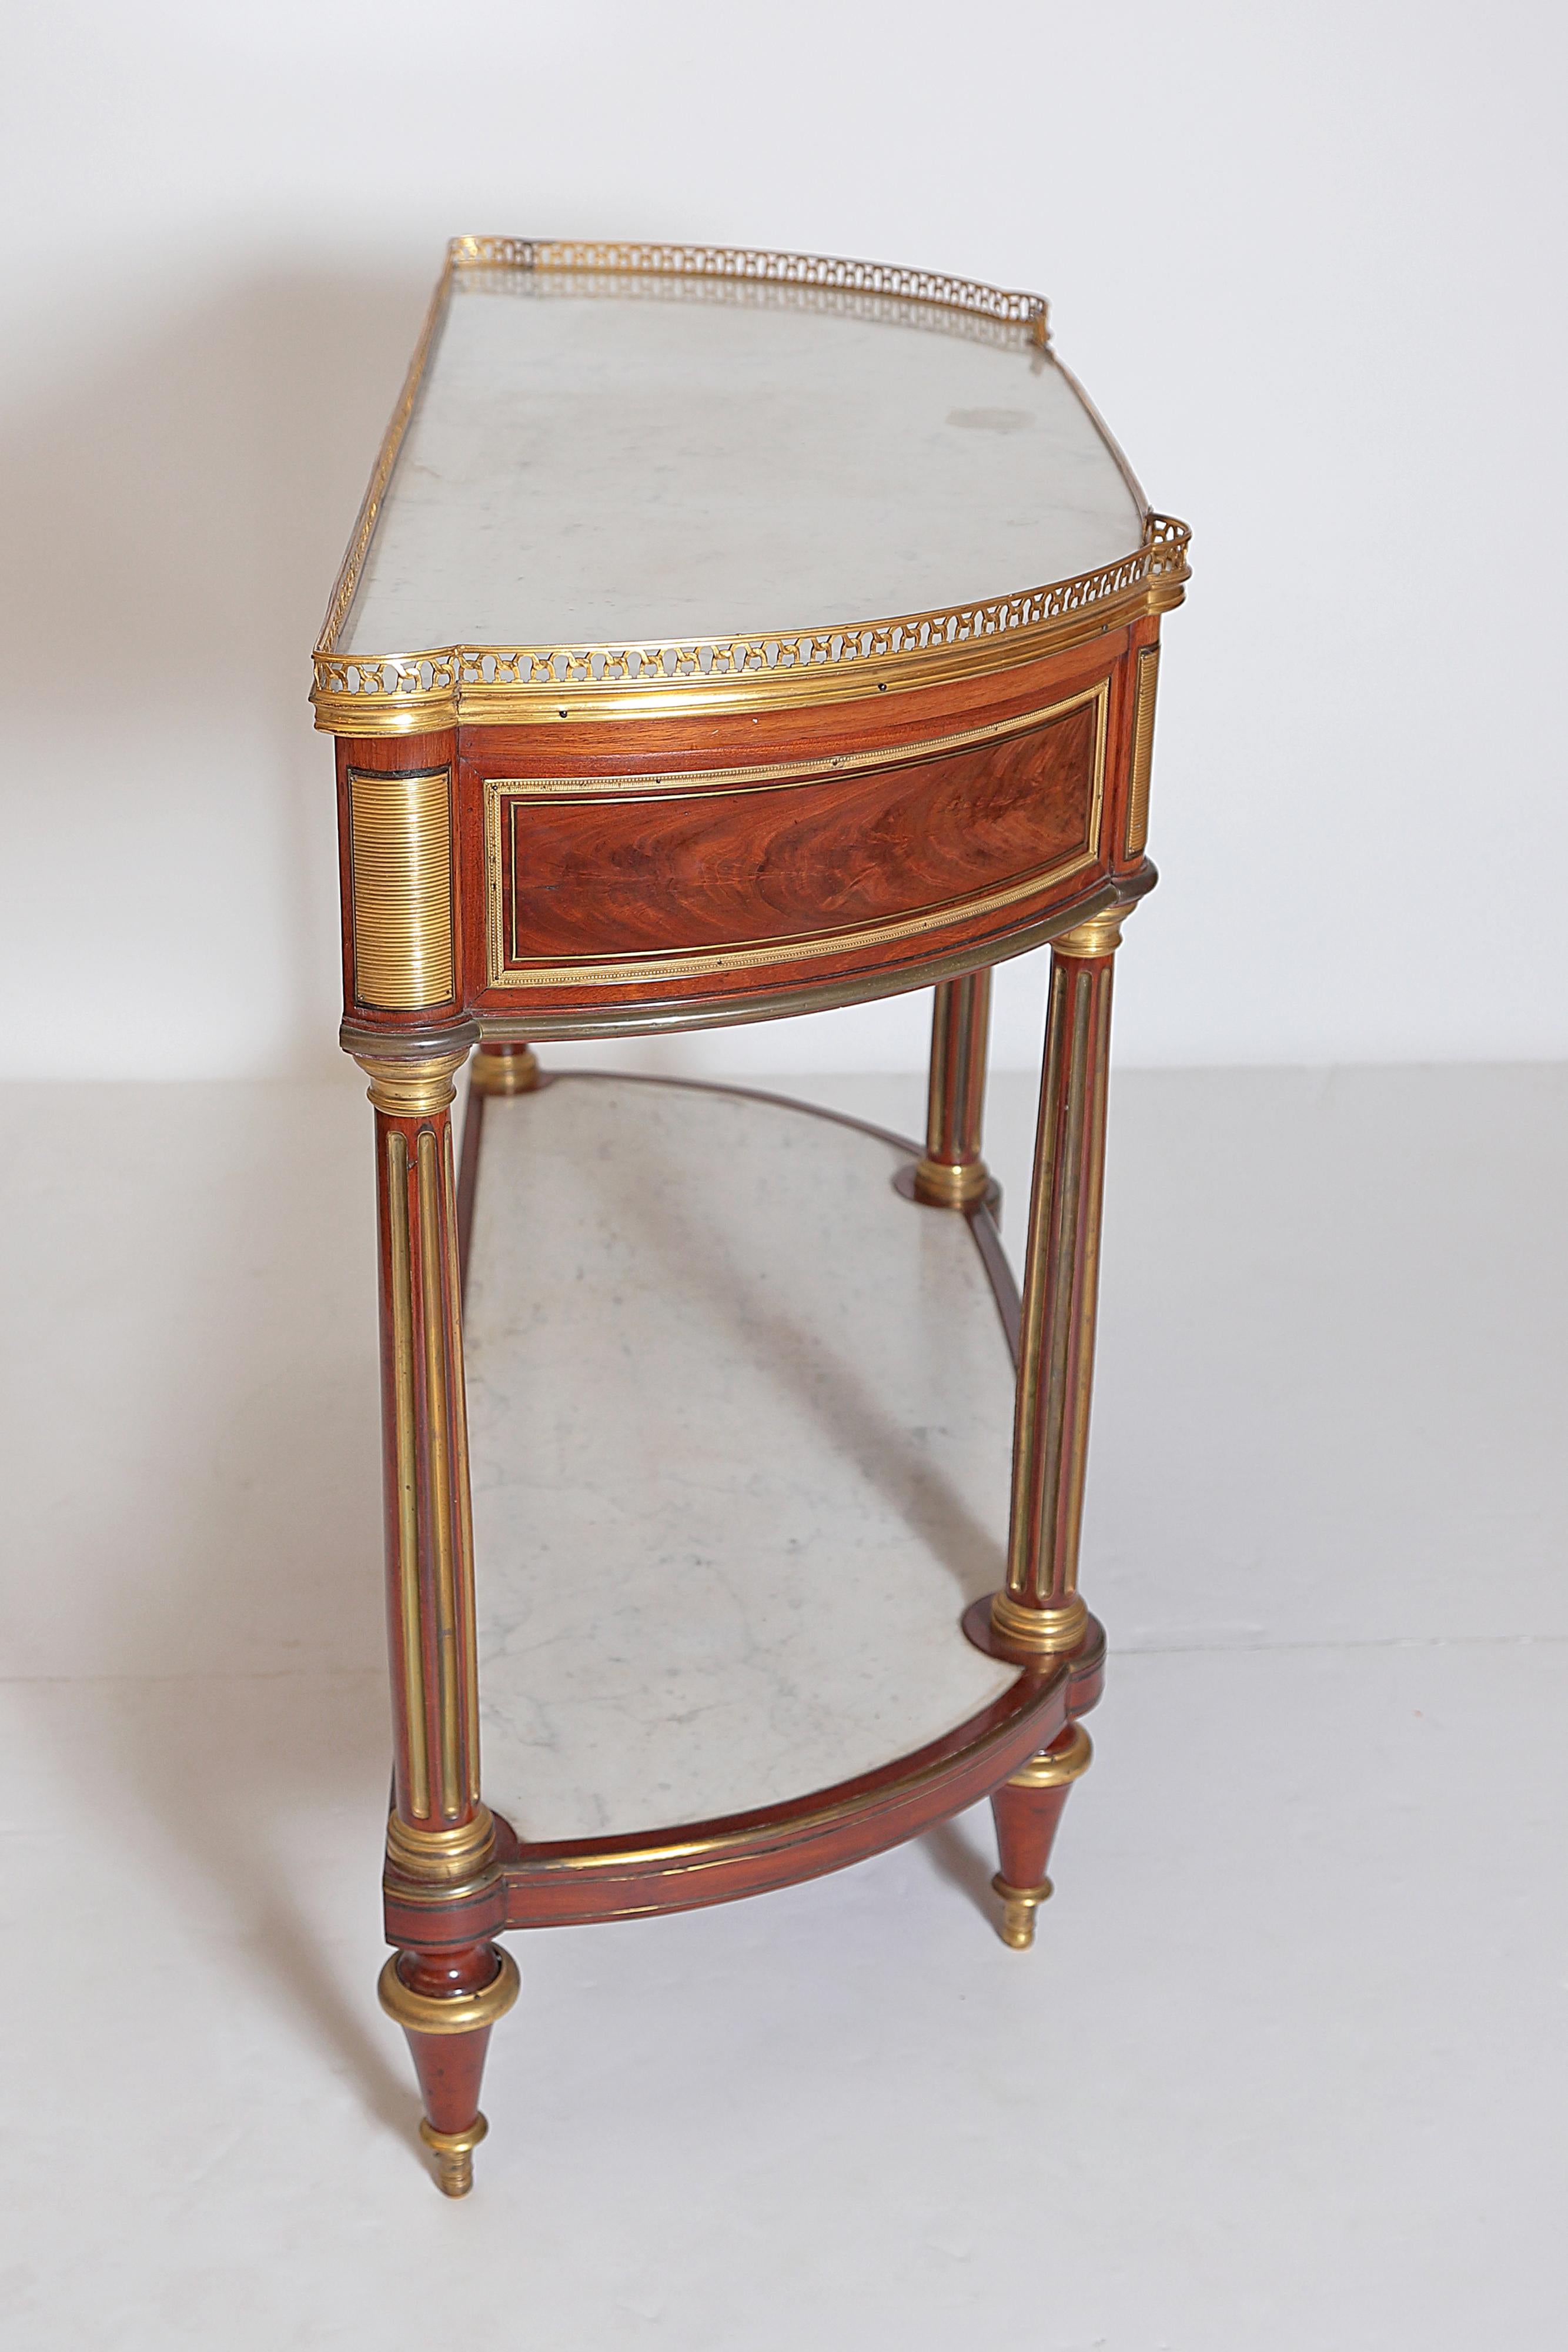 Late 18th Century Louis XVI Mahogany, Ormolu and Marble Desserte, Signed I. PAFRAT, circa 1775 For Sale